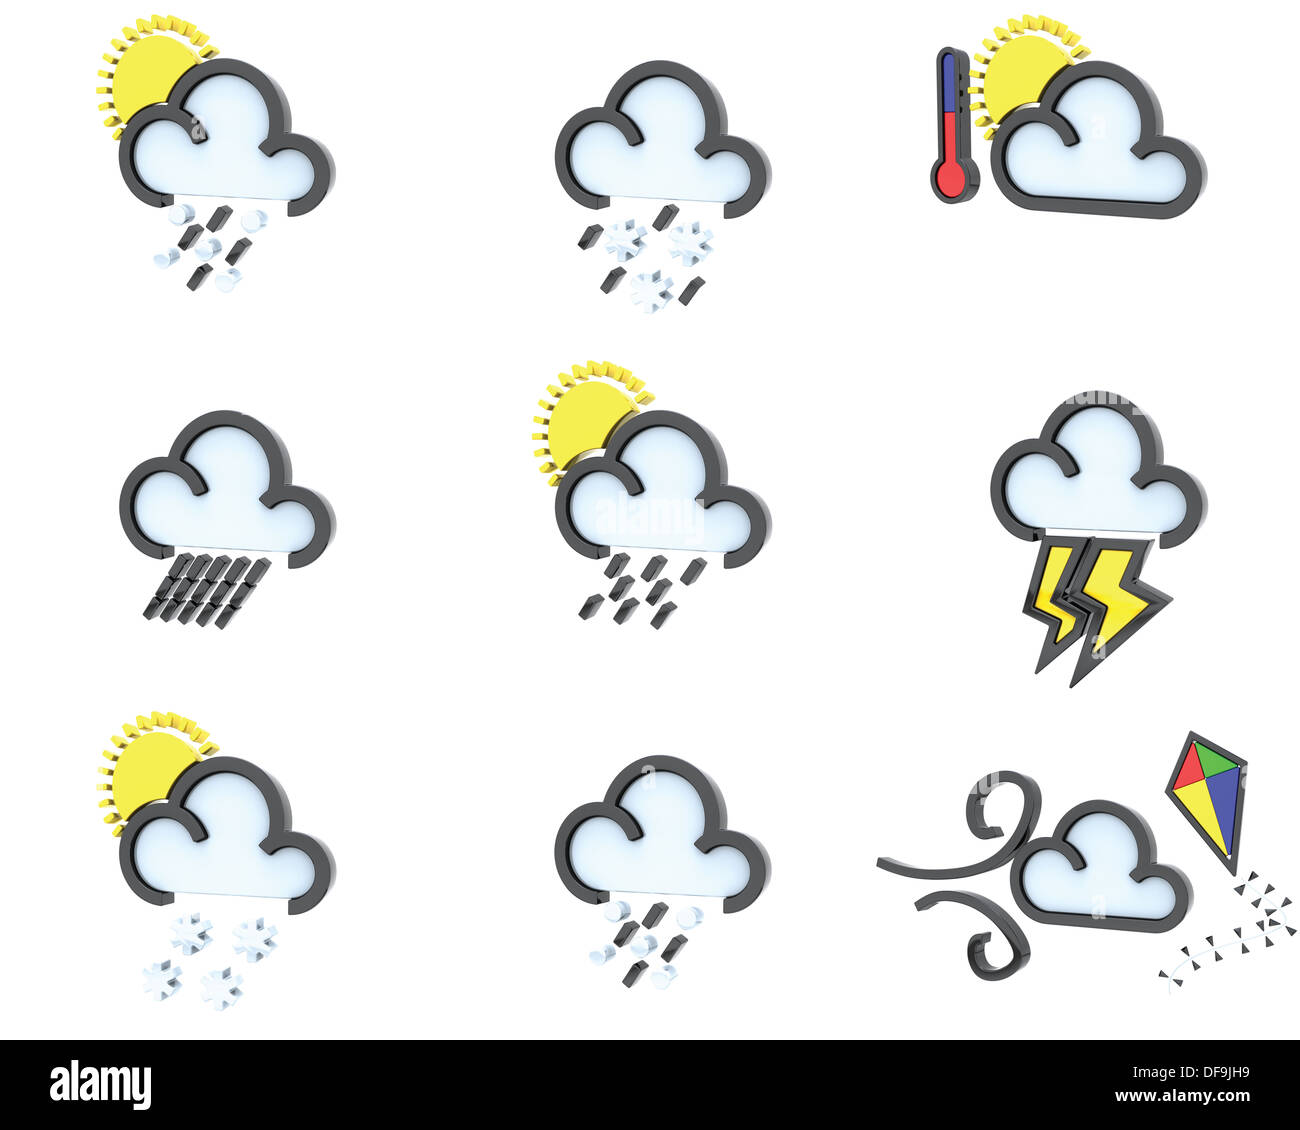 3D Render of weather icons Stock Photo